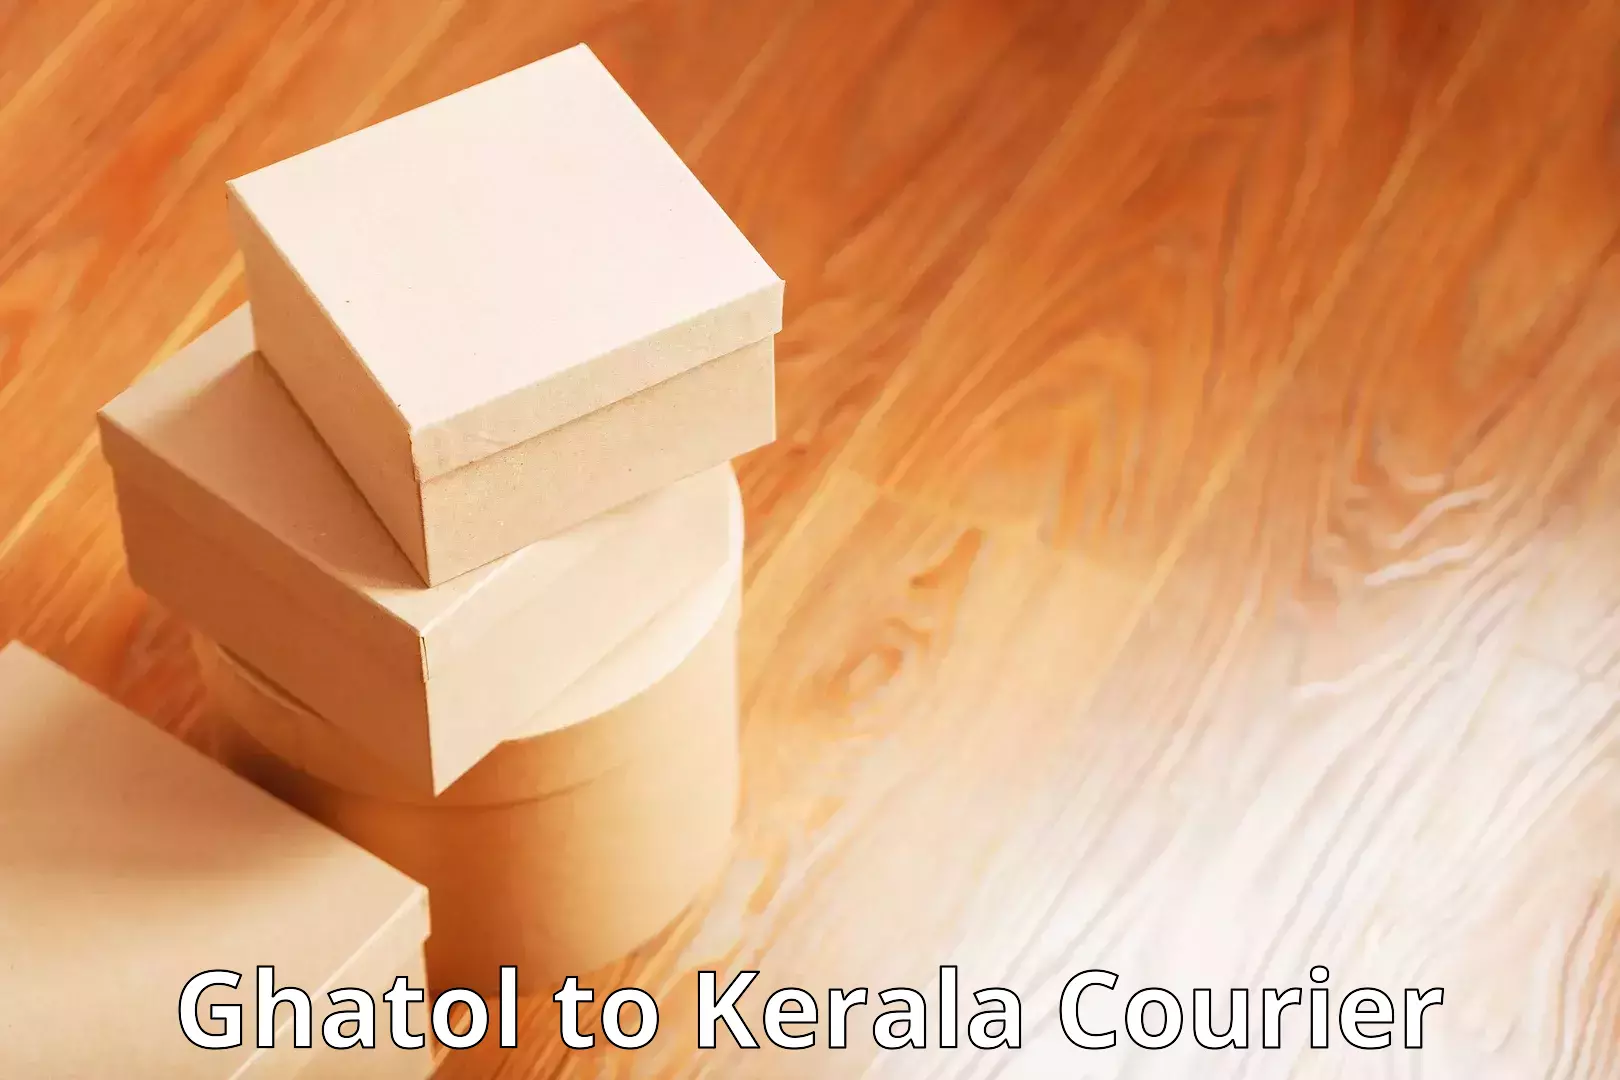 Courier service partnerships Ghatol to Kumily